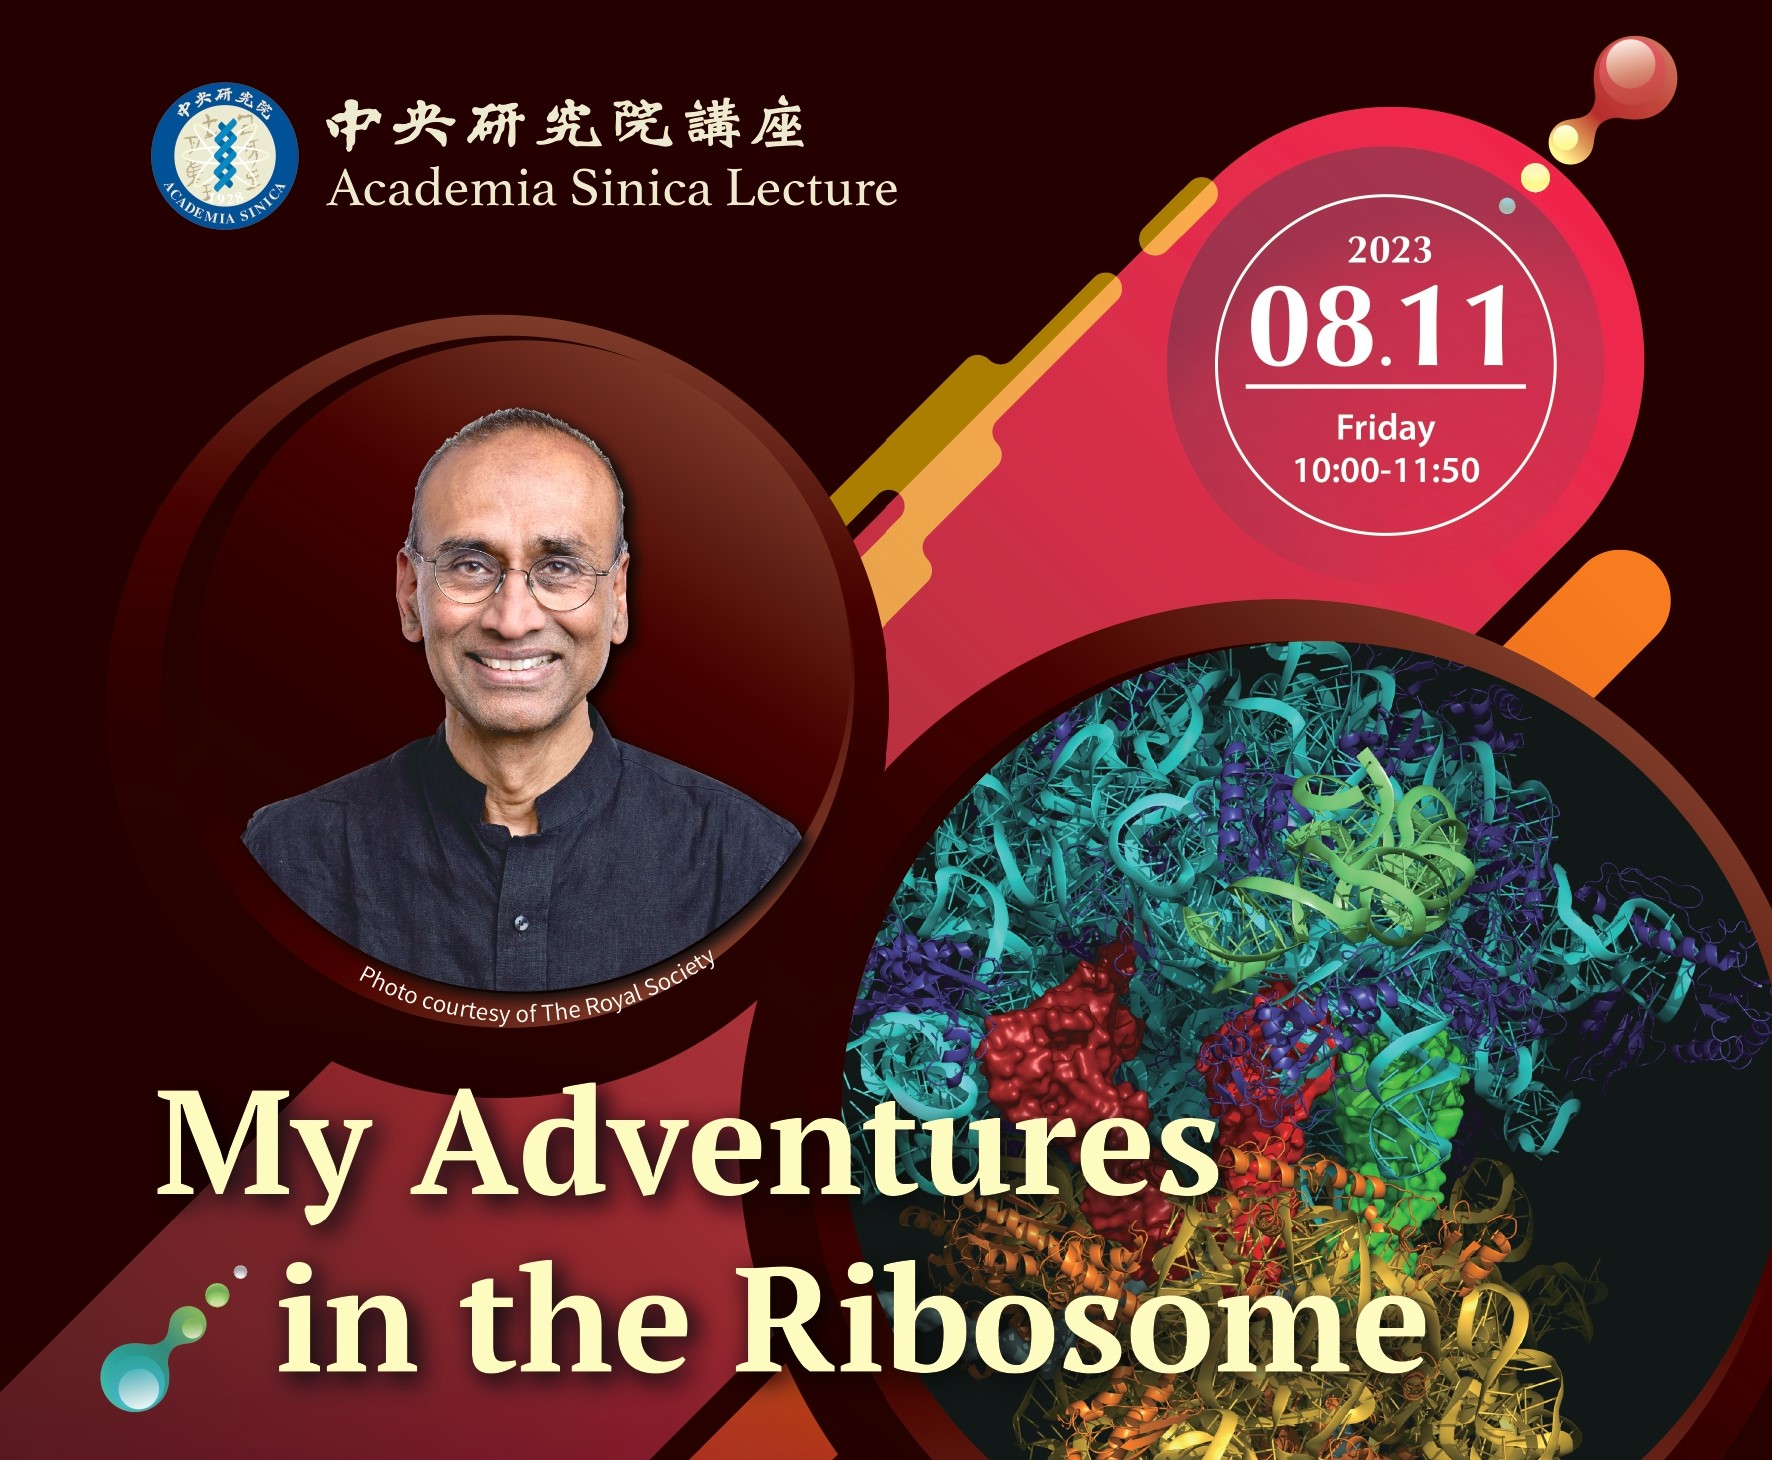 【Press Releases】Dr. Venki Ramakrishnan, Nobel Laureate and Structural Biologist, is to Deliver Lecture on Ribosomes in the 2023 Academia Sinica Lecture Series